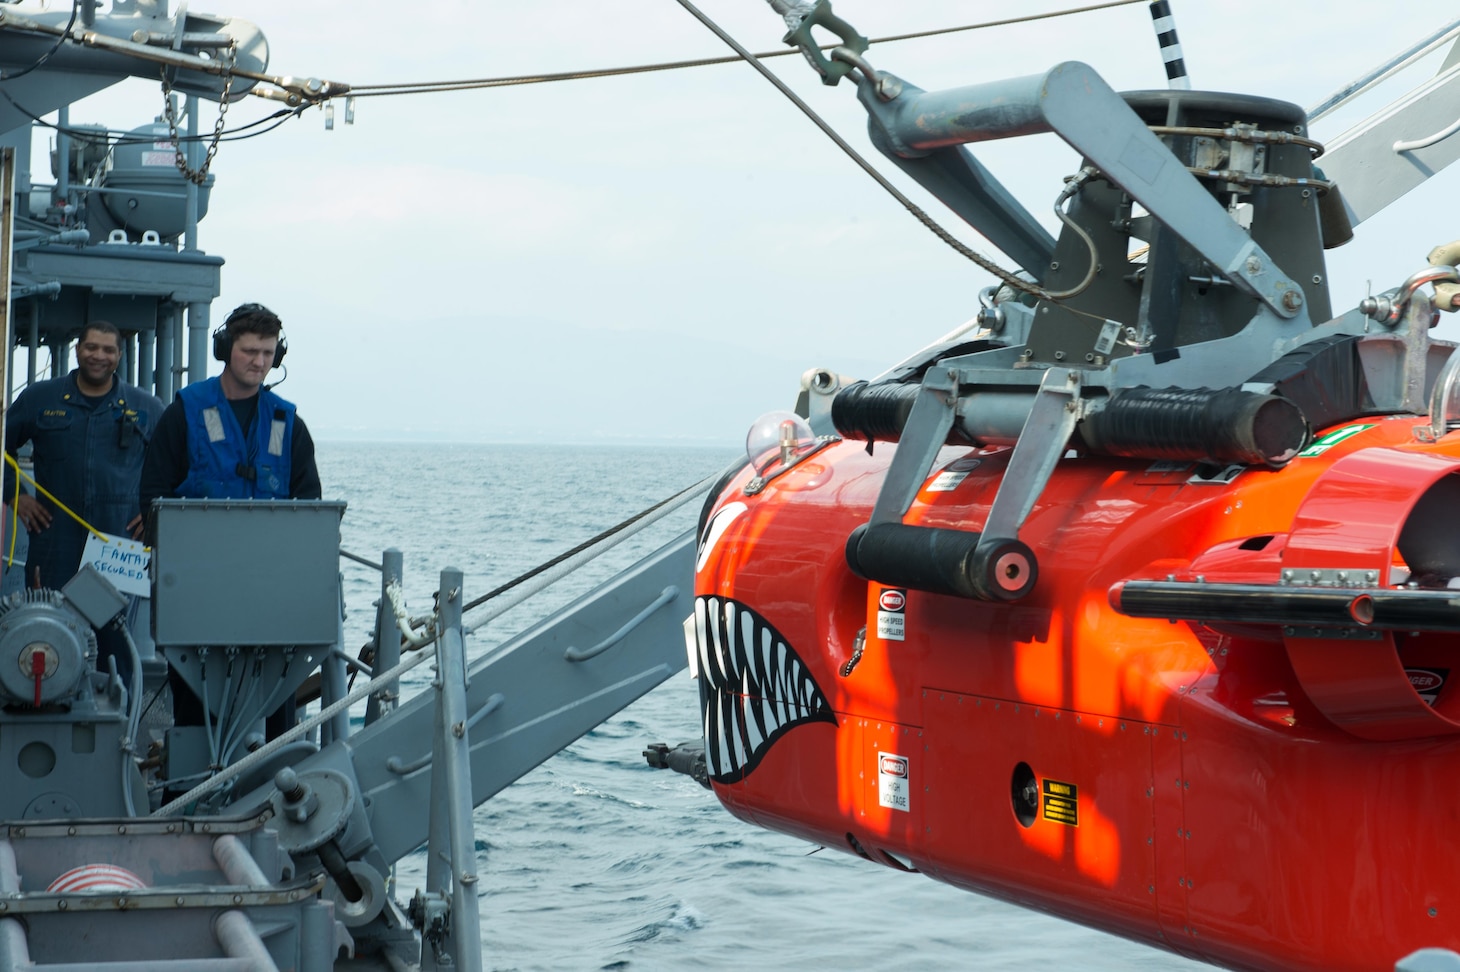 Mineman 1st Class Justin Crabtree, from Diamondhead, Miss., lowers a mine neutralization vehicle aboard the Avenger-class mine countermeasures ship USS Chief (MCM 14) into the water to track mines and simulate delivering an explosive package.